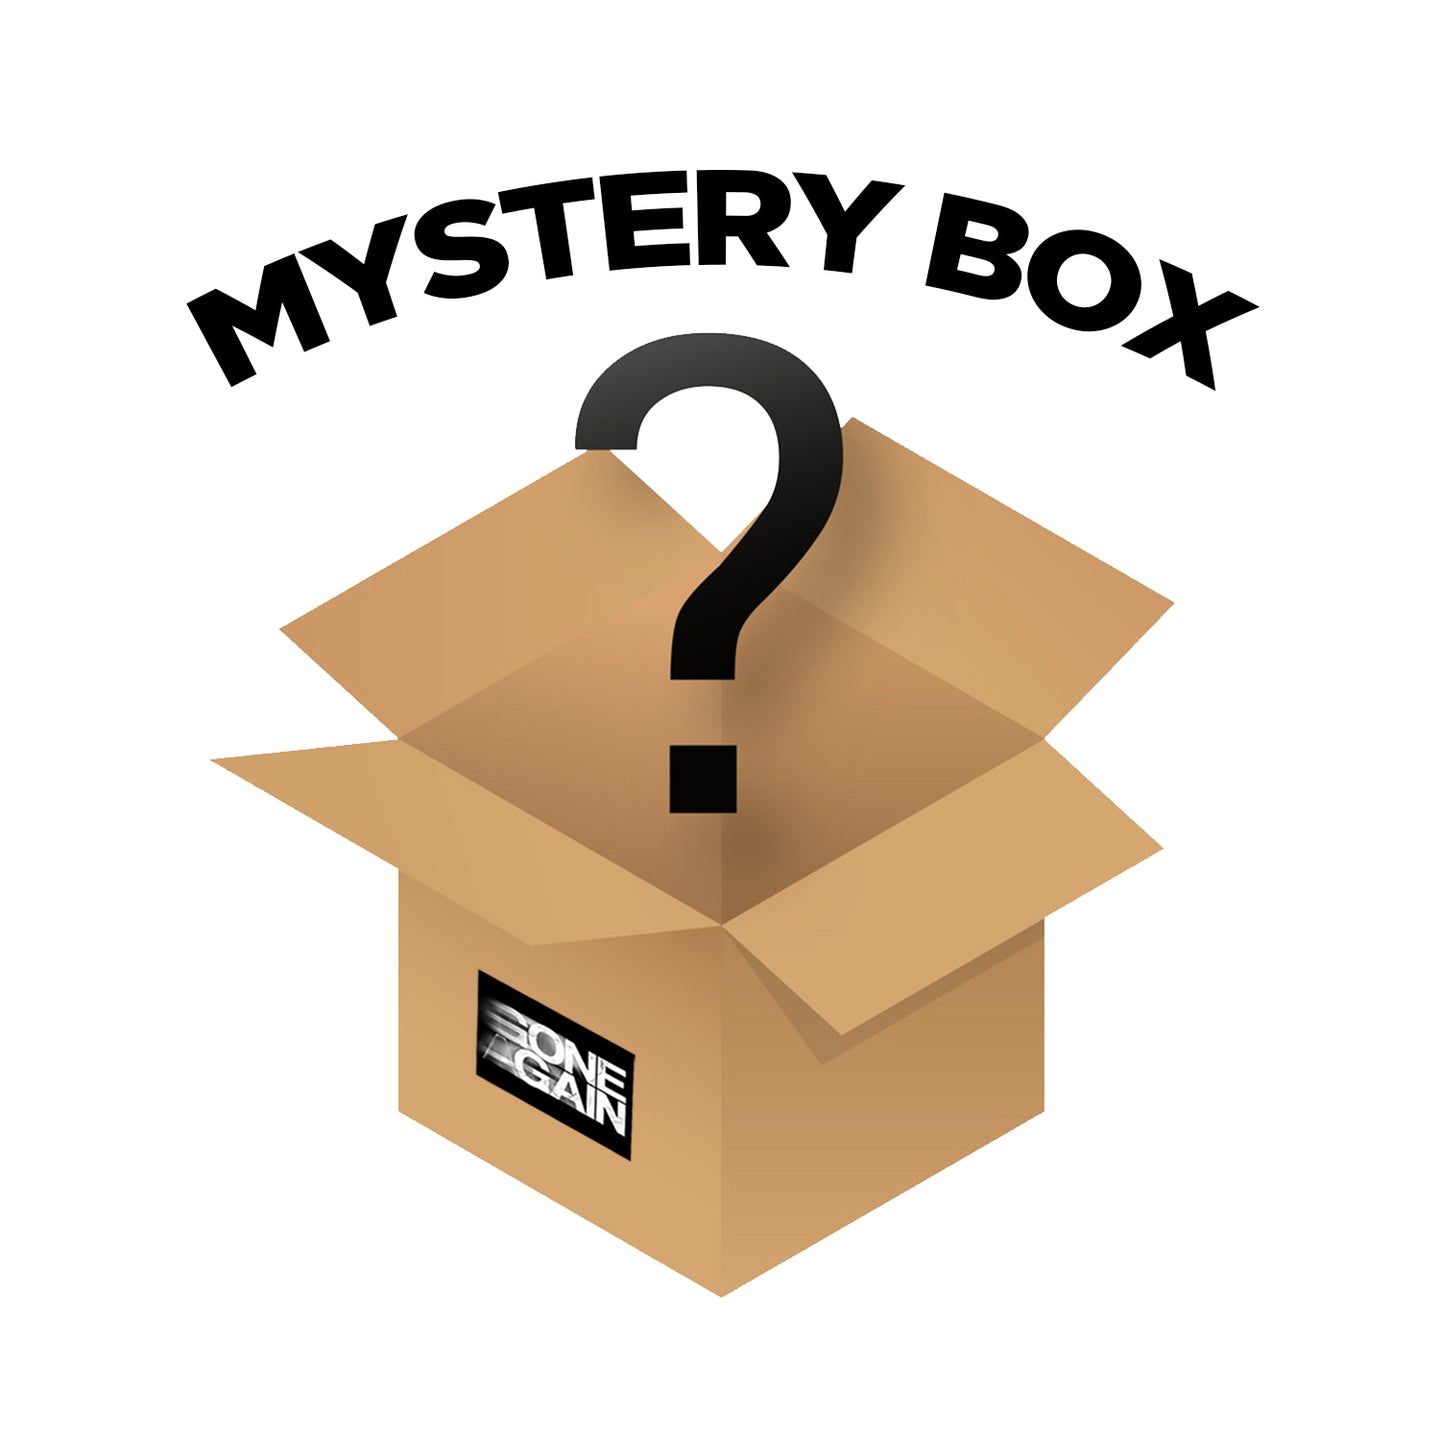 Vintage Mystery Box - Small